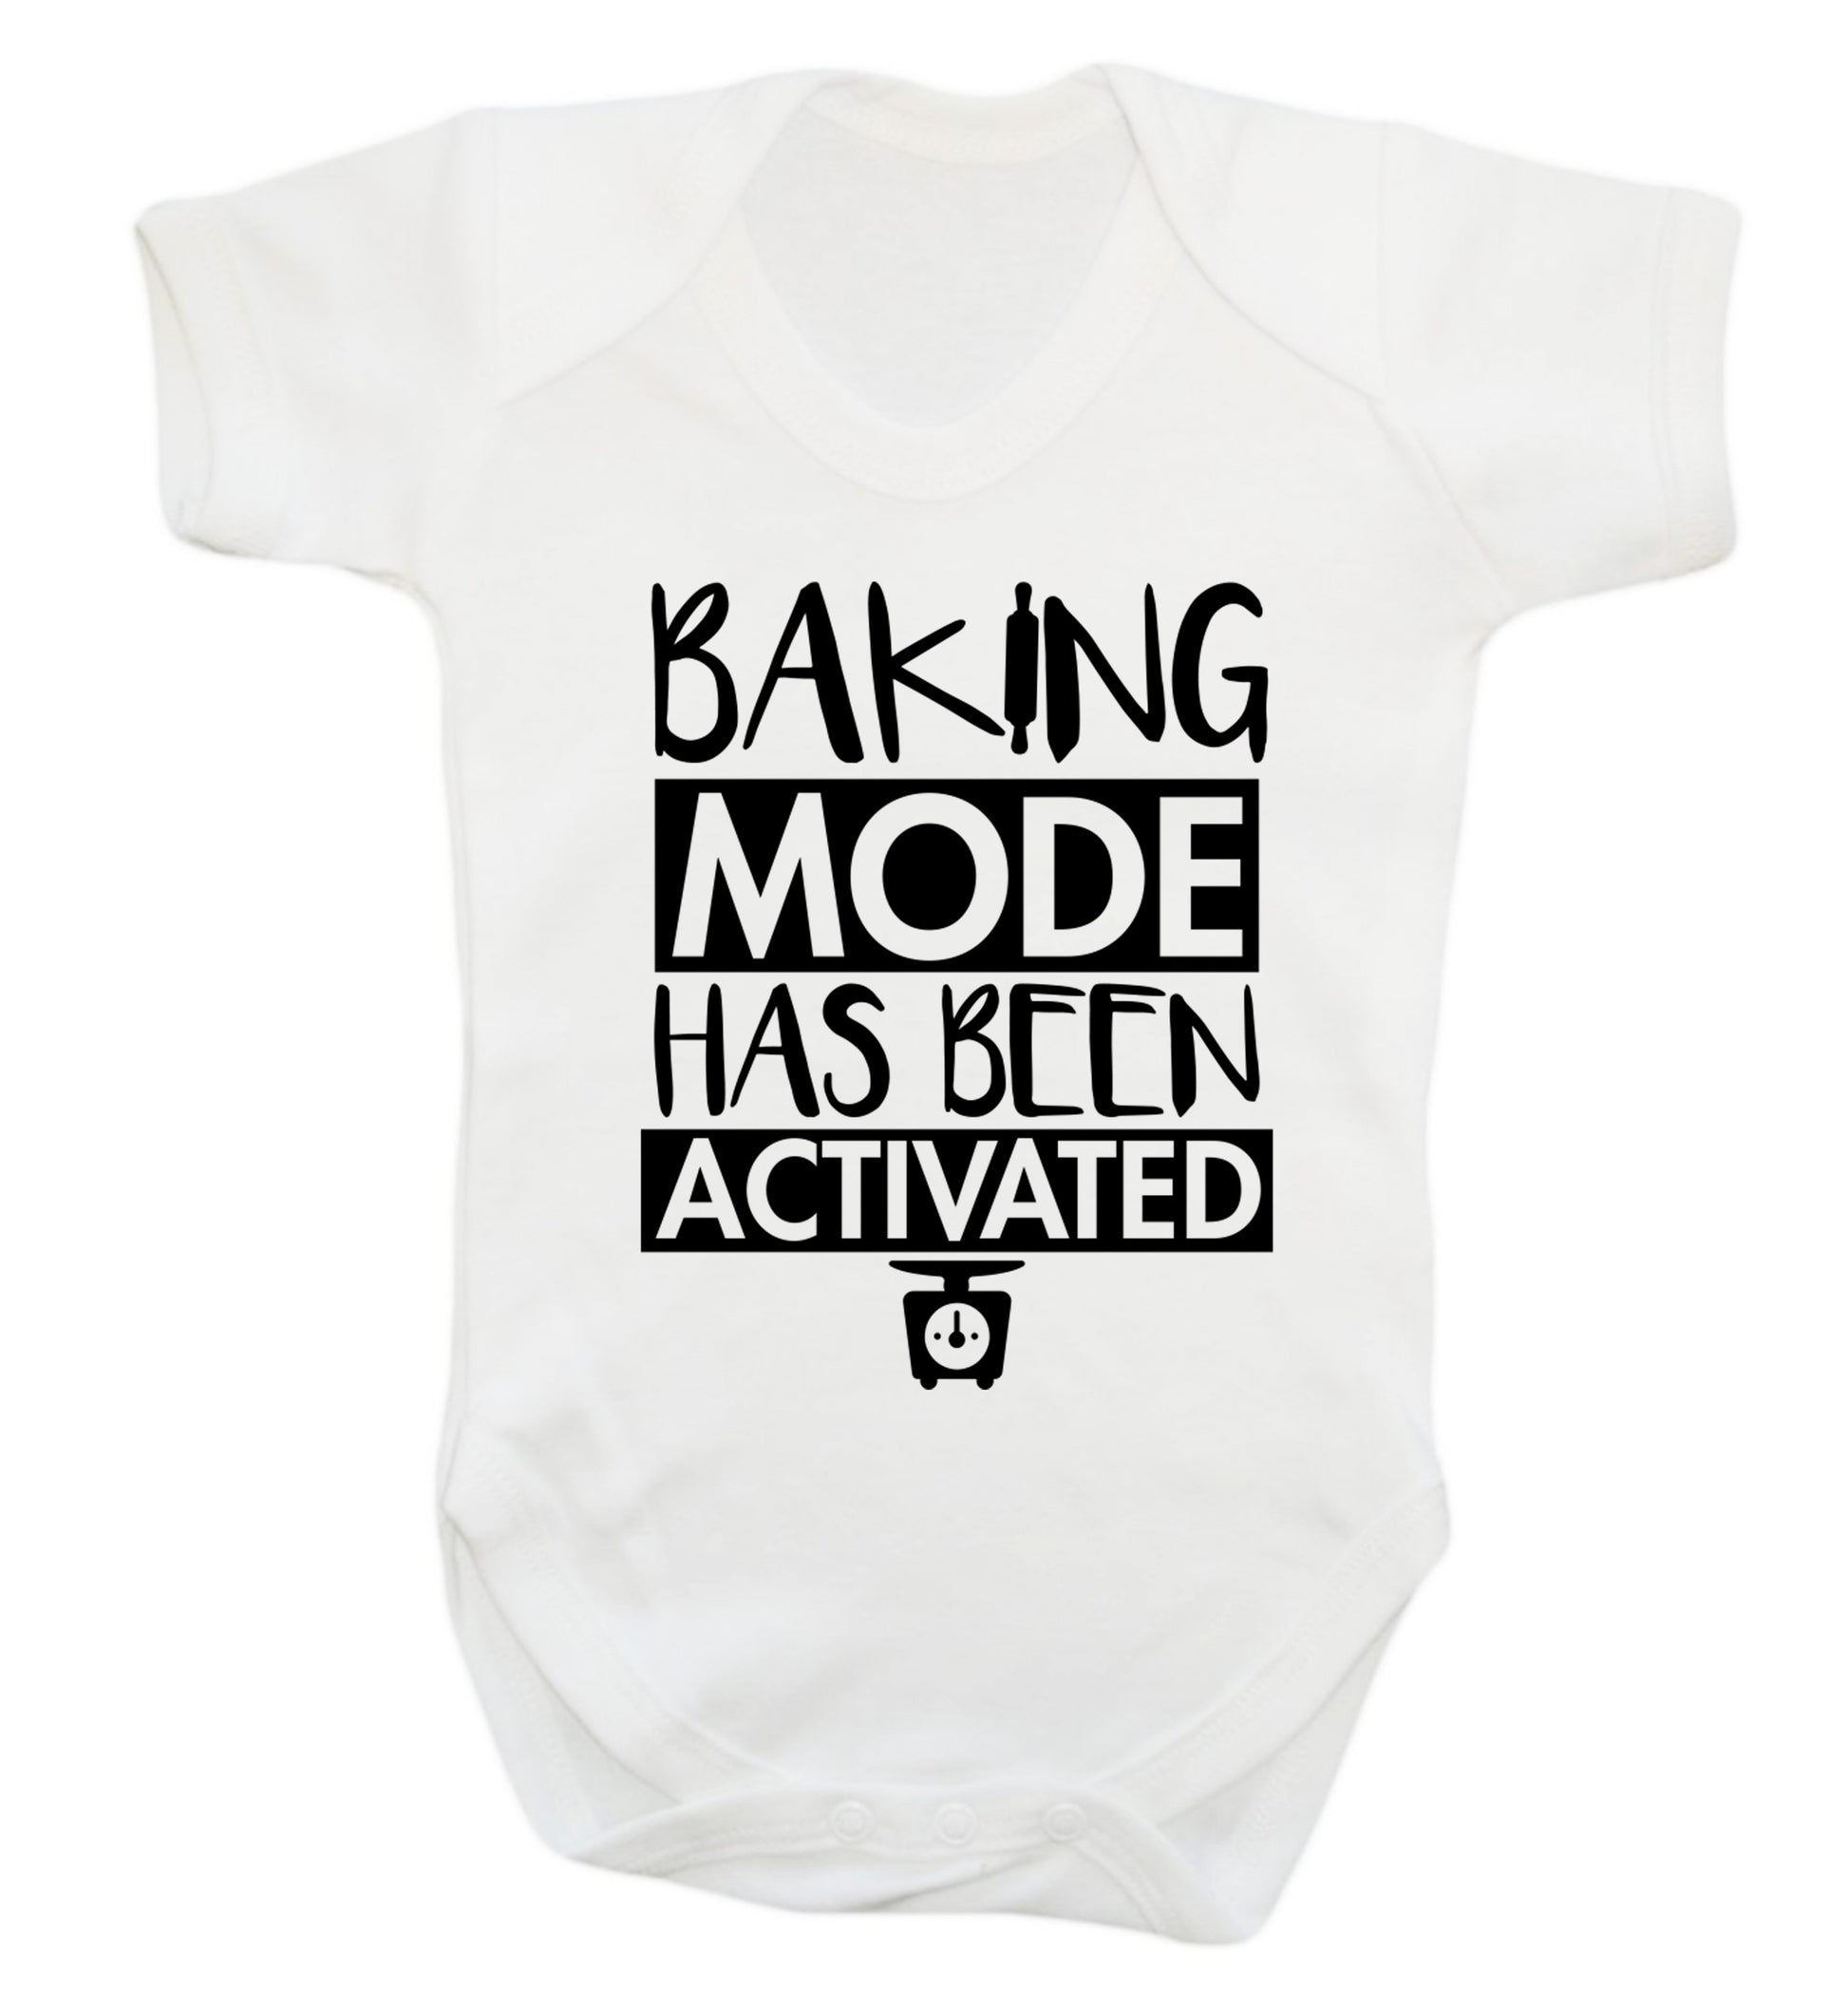 Baking mode has been activated Baby Vest white 18-24 months